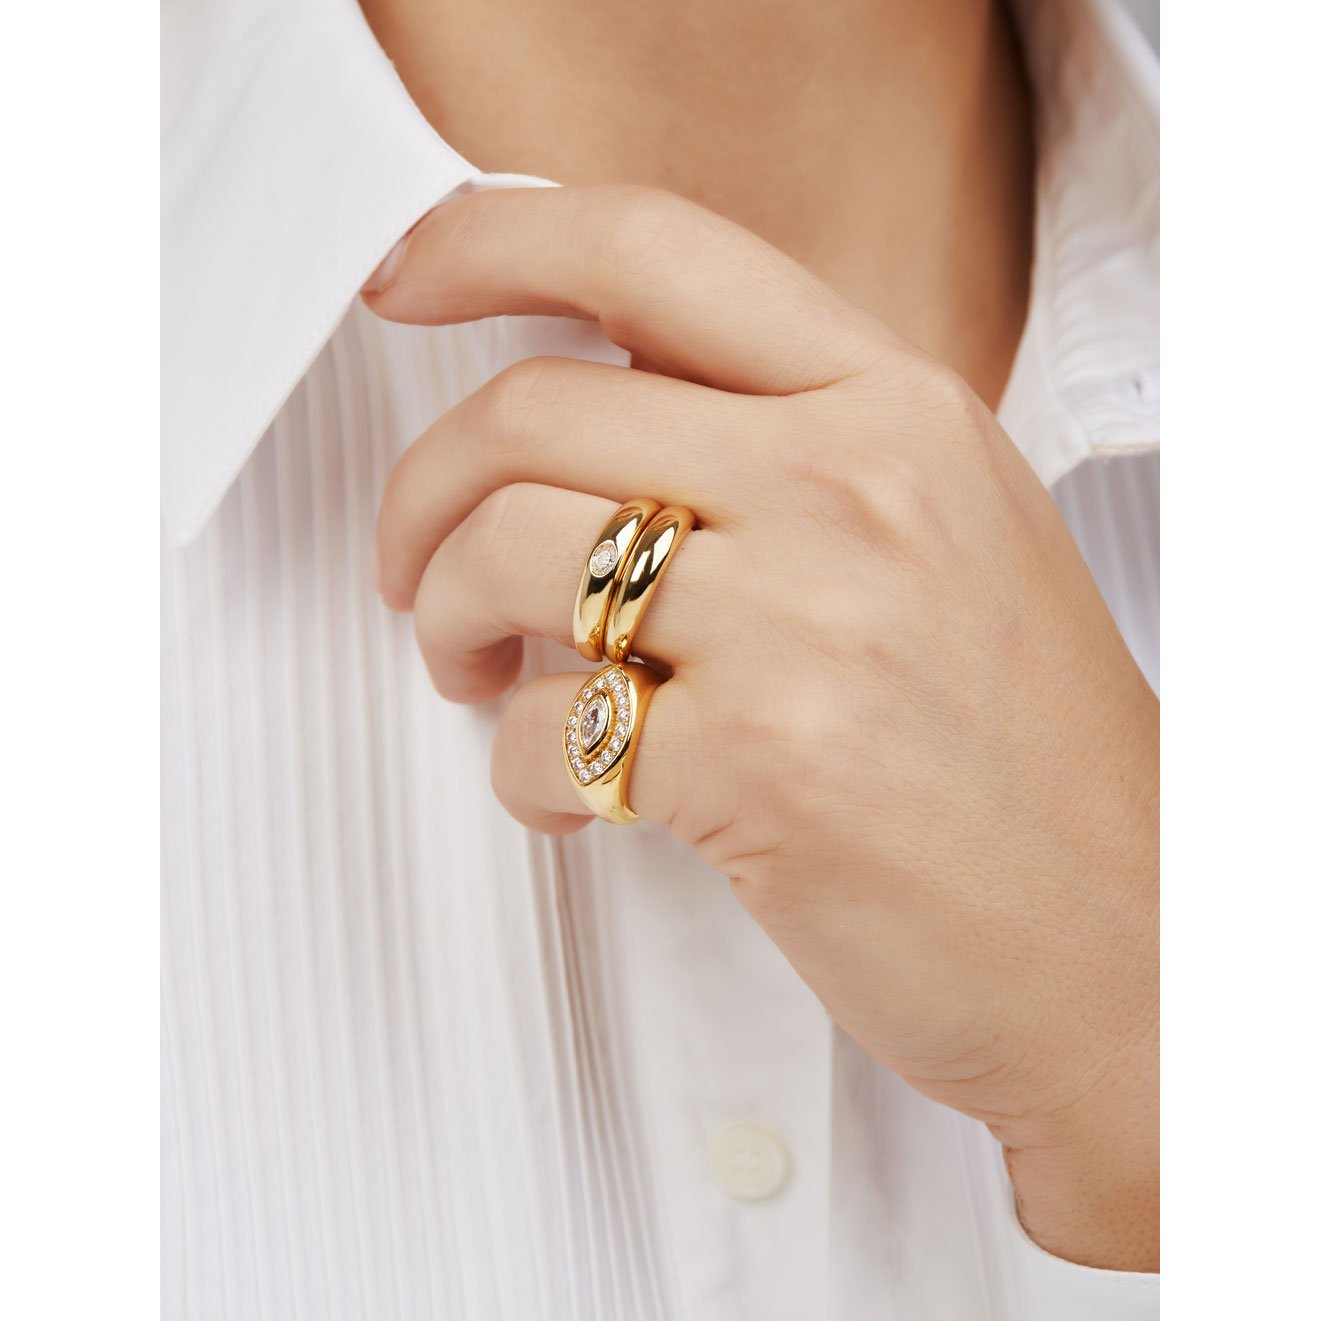 Lara band with white stone gold vermeil ring